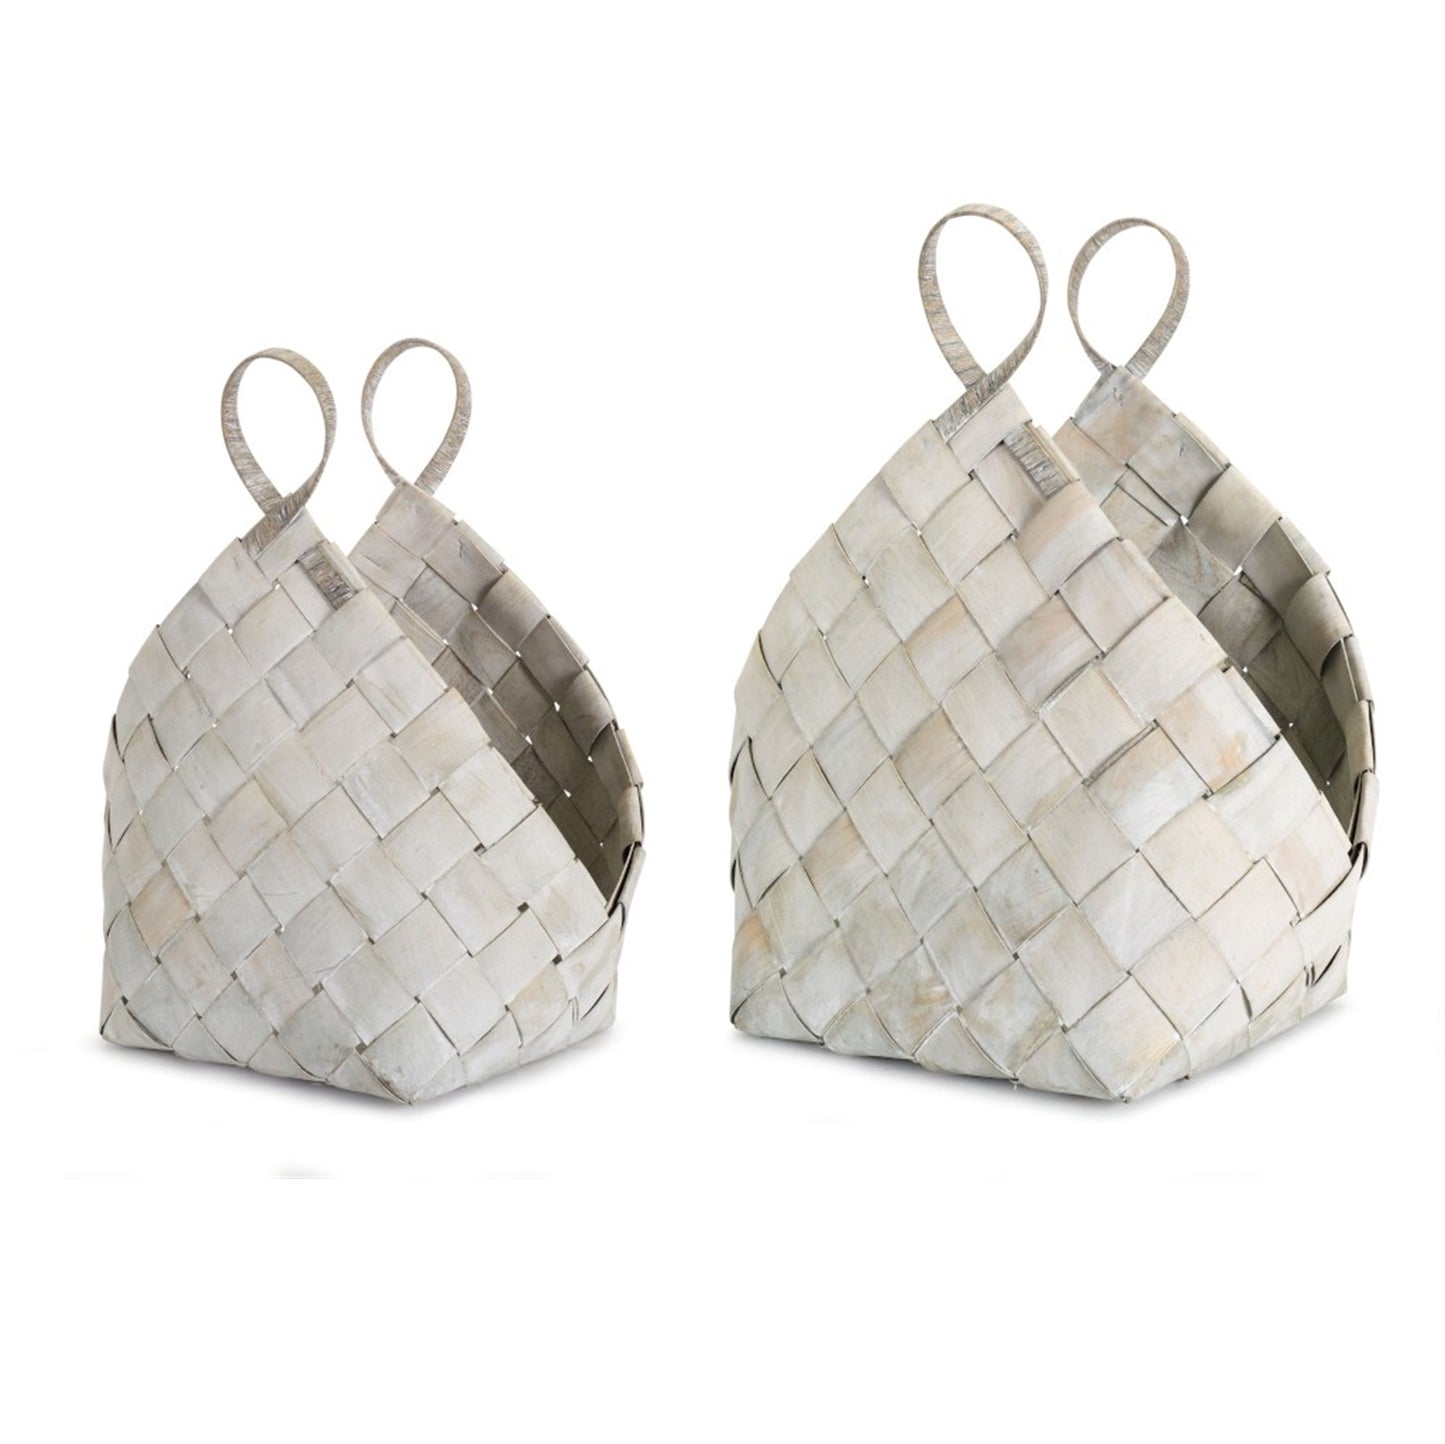 Stylish Weaved Baskets Set Of 4 (Two Colors)